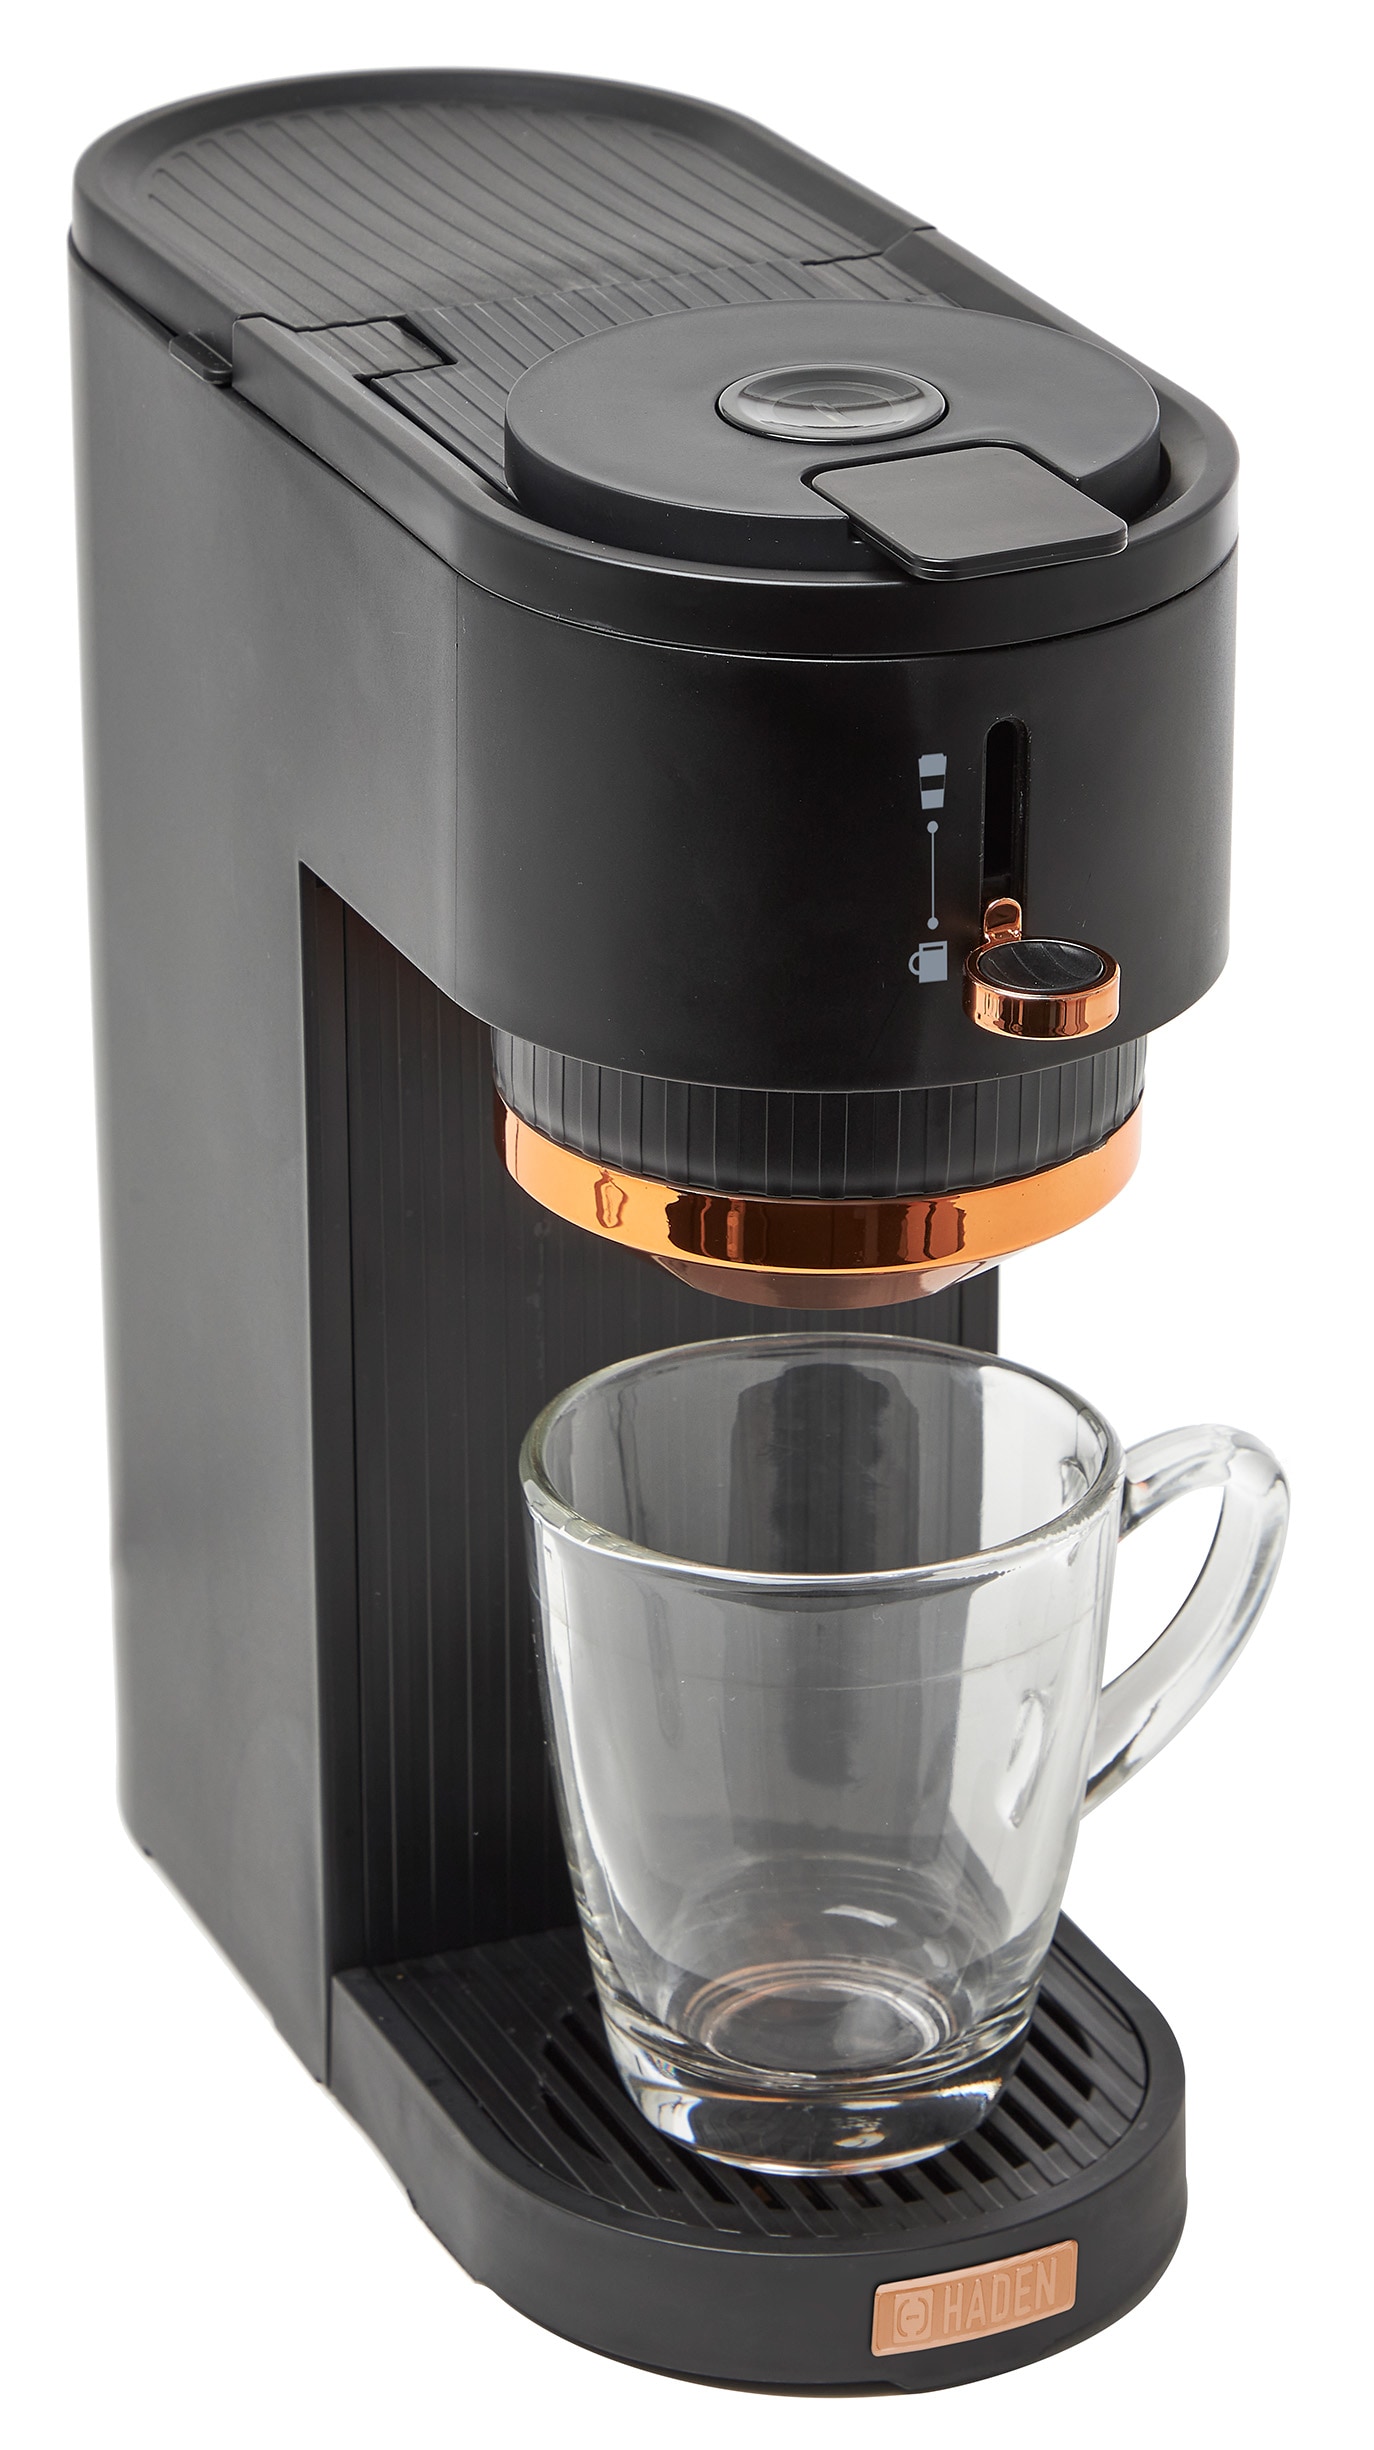 Haden Heritage 12-Cup Programmable Coffee Maker - Ivory / Copper